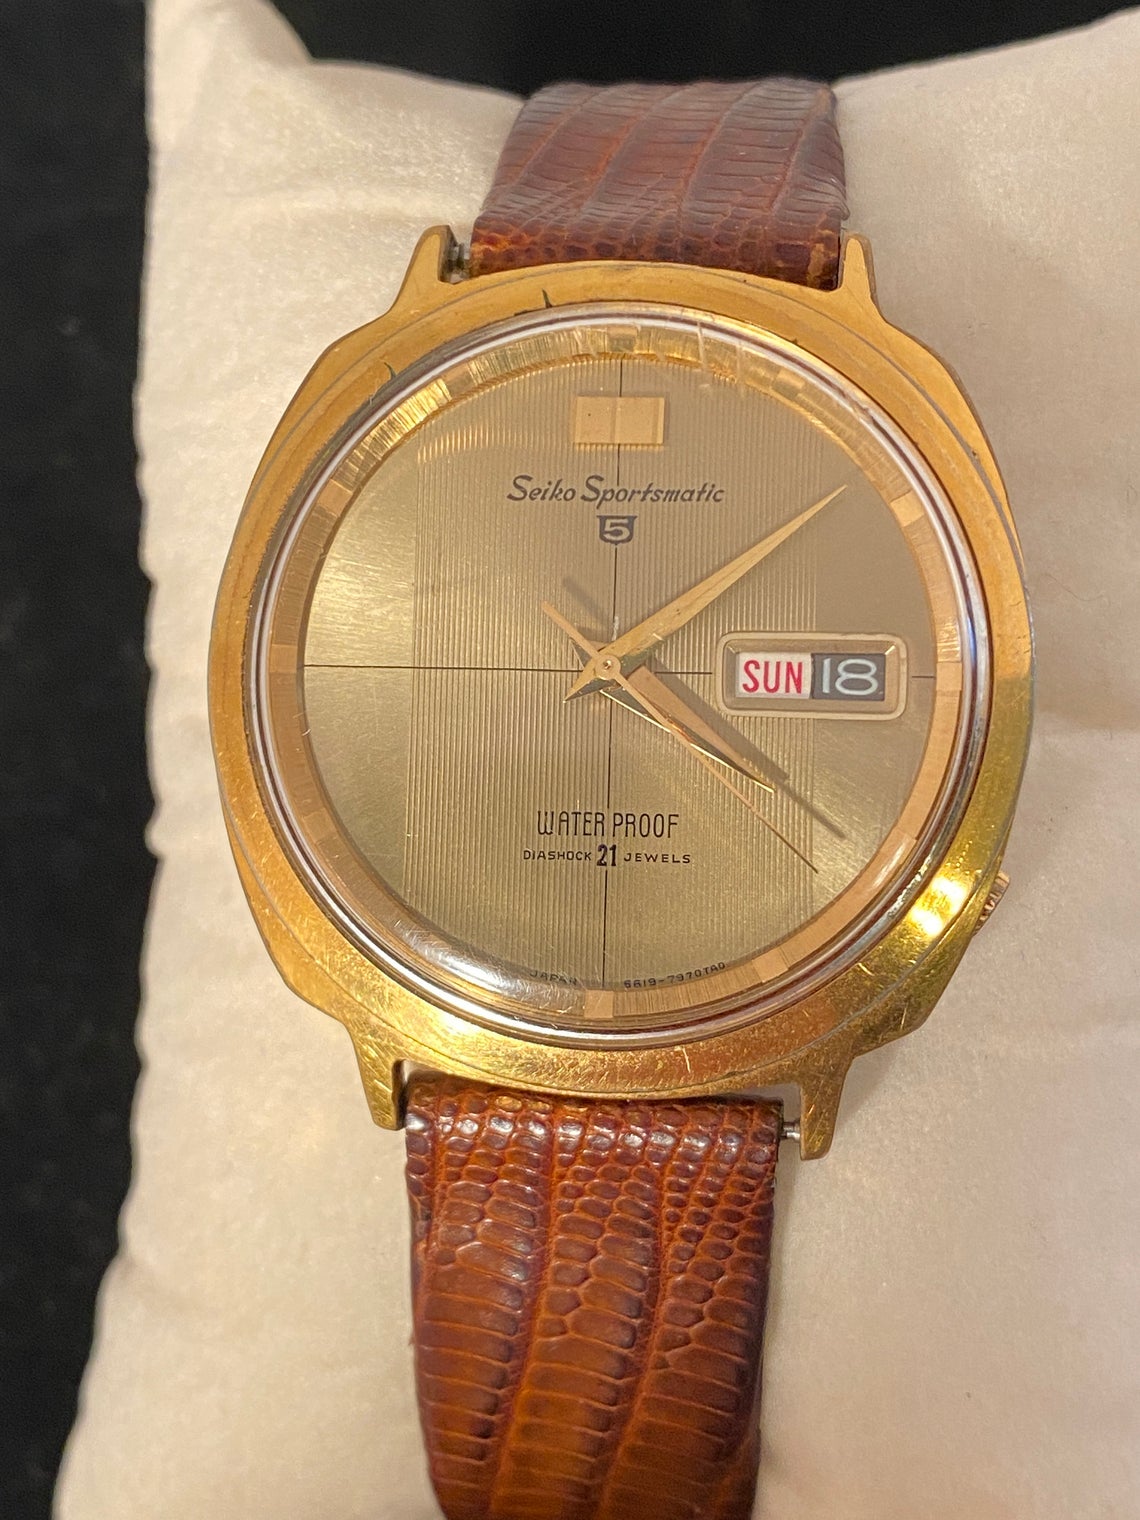 Vintage Watch Selection - SEIKO SPORTSMATIC 5 | The Walkabout Company